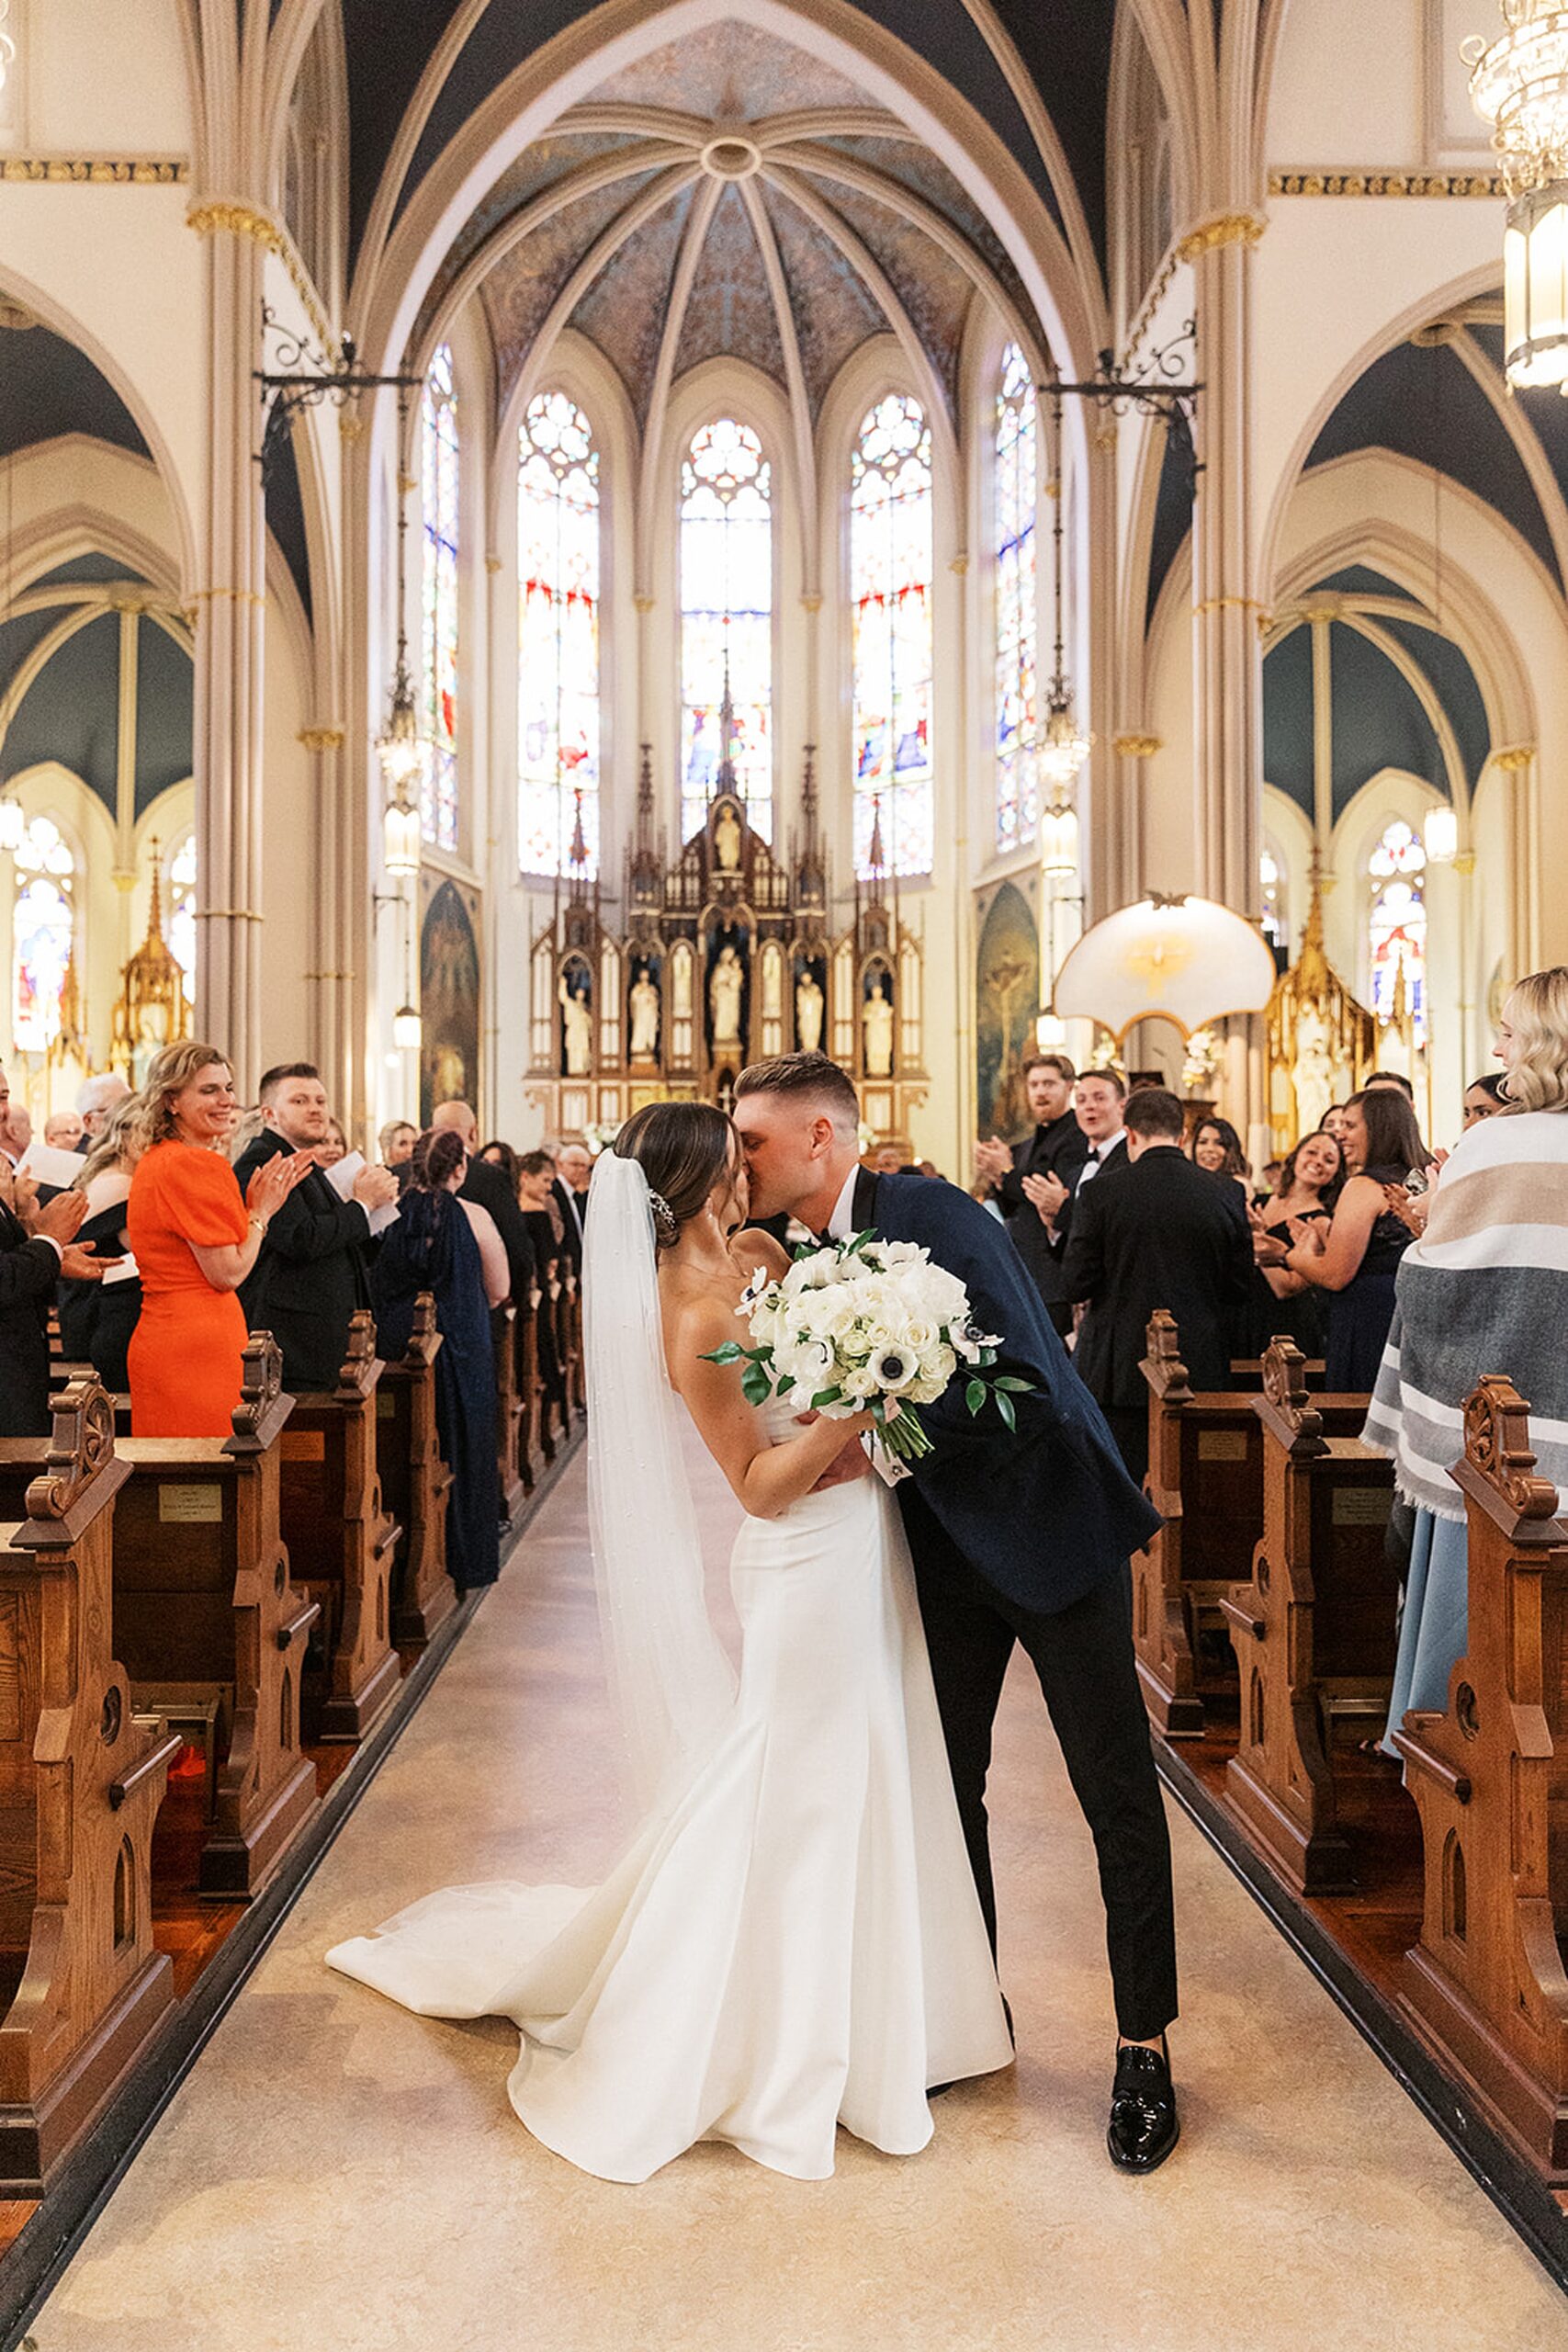 Newlyweds kiss at the end of the aisle in a large church while their guests clap and cheer